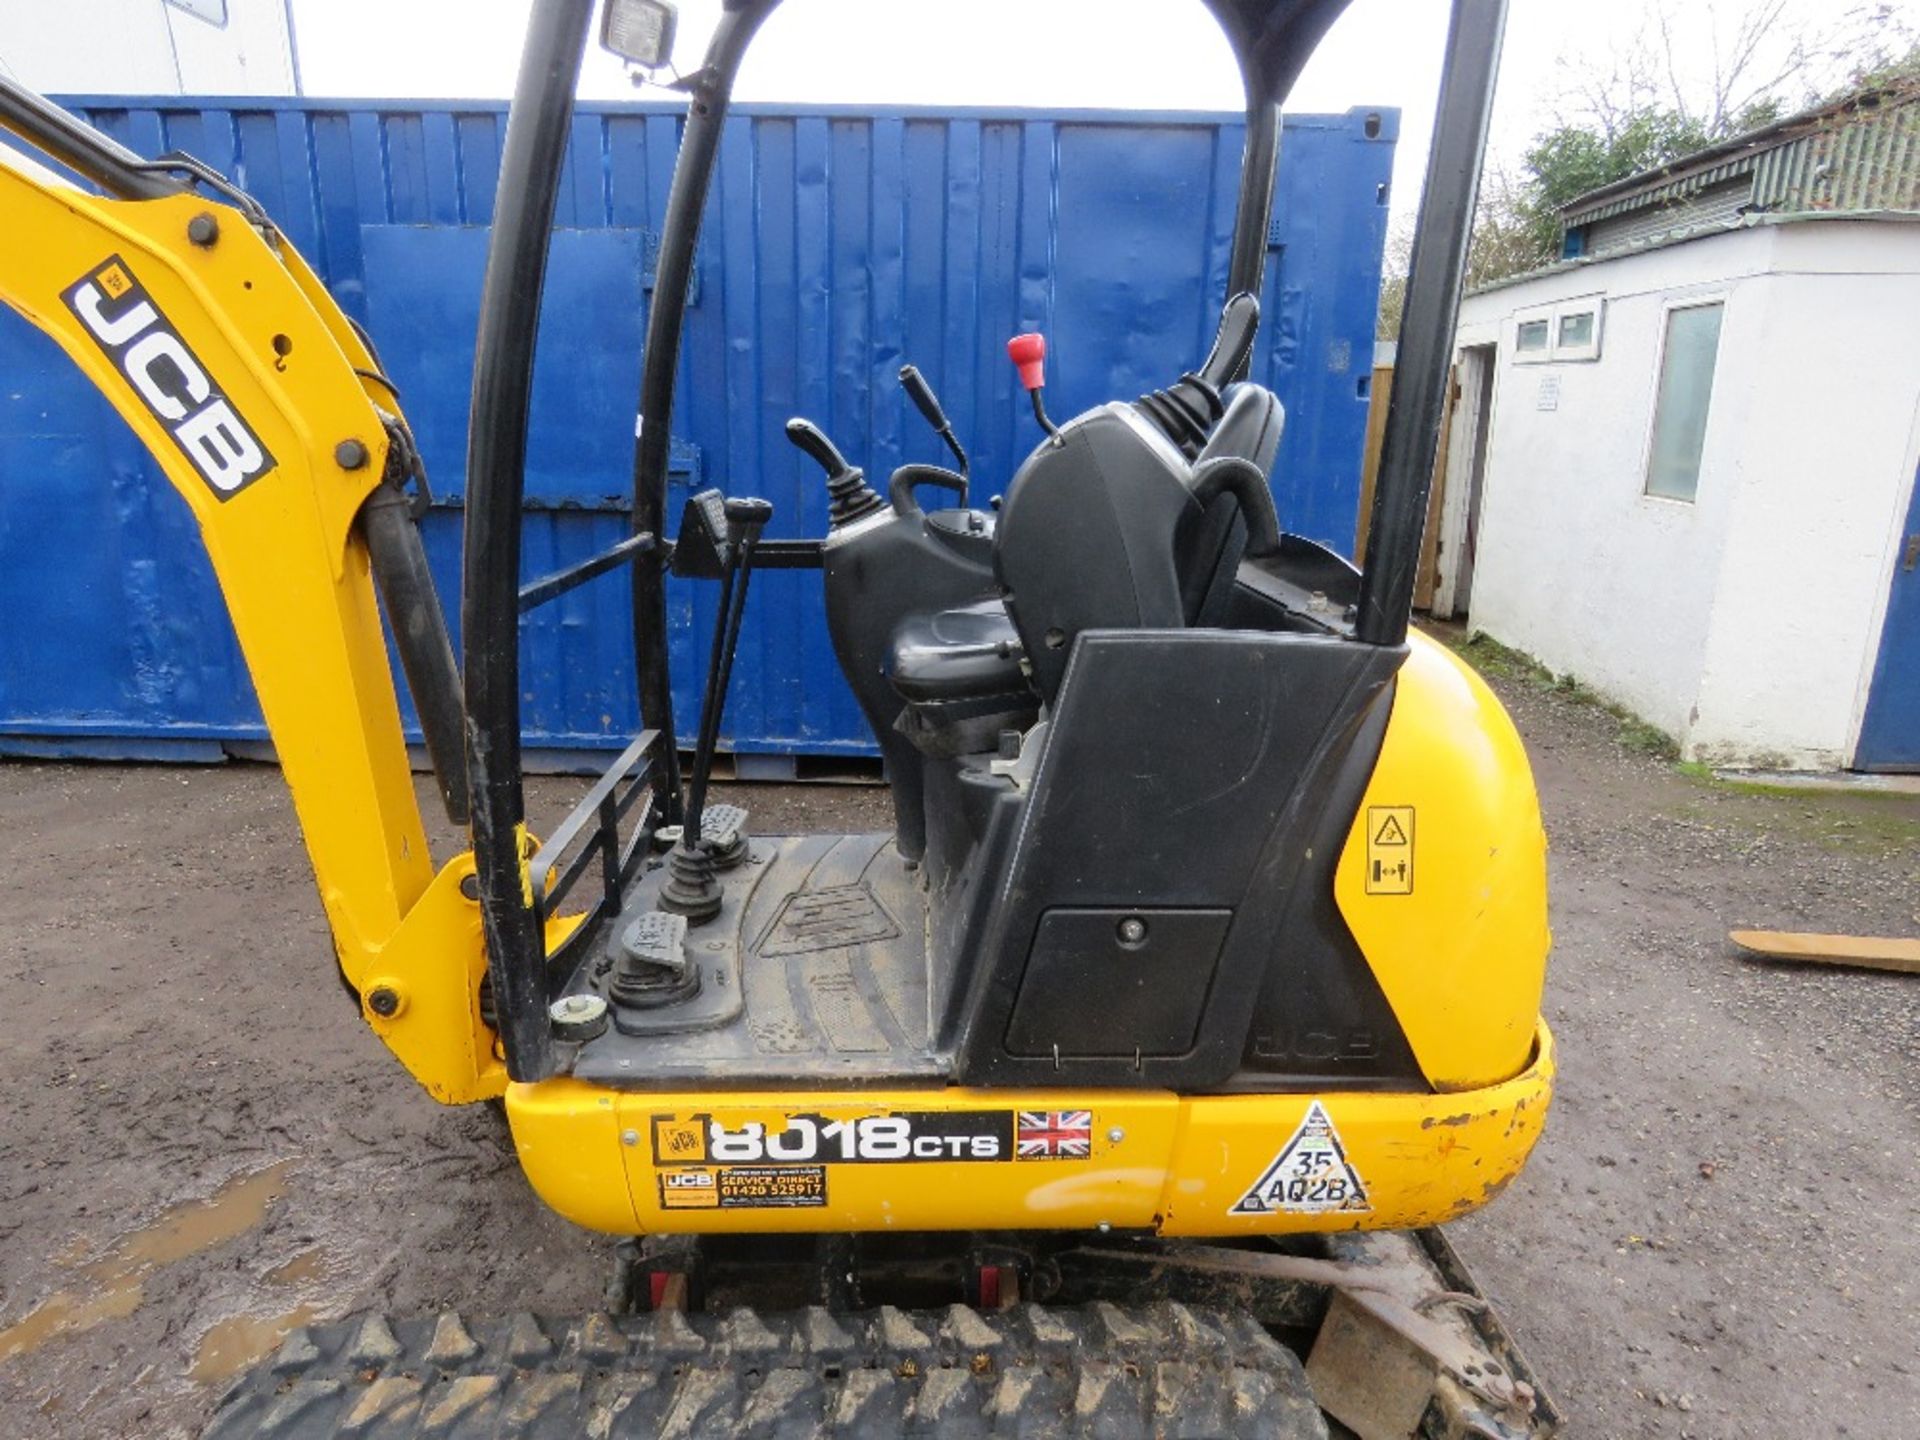 JCB 8018CTS RUBBER TRACKED MINI EXCAVATOR YEAR 2017, 1017 REC HOURS. WITH ONE BUCKET AND A POST HOLE - Image 2 of 12